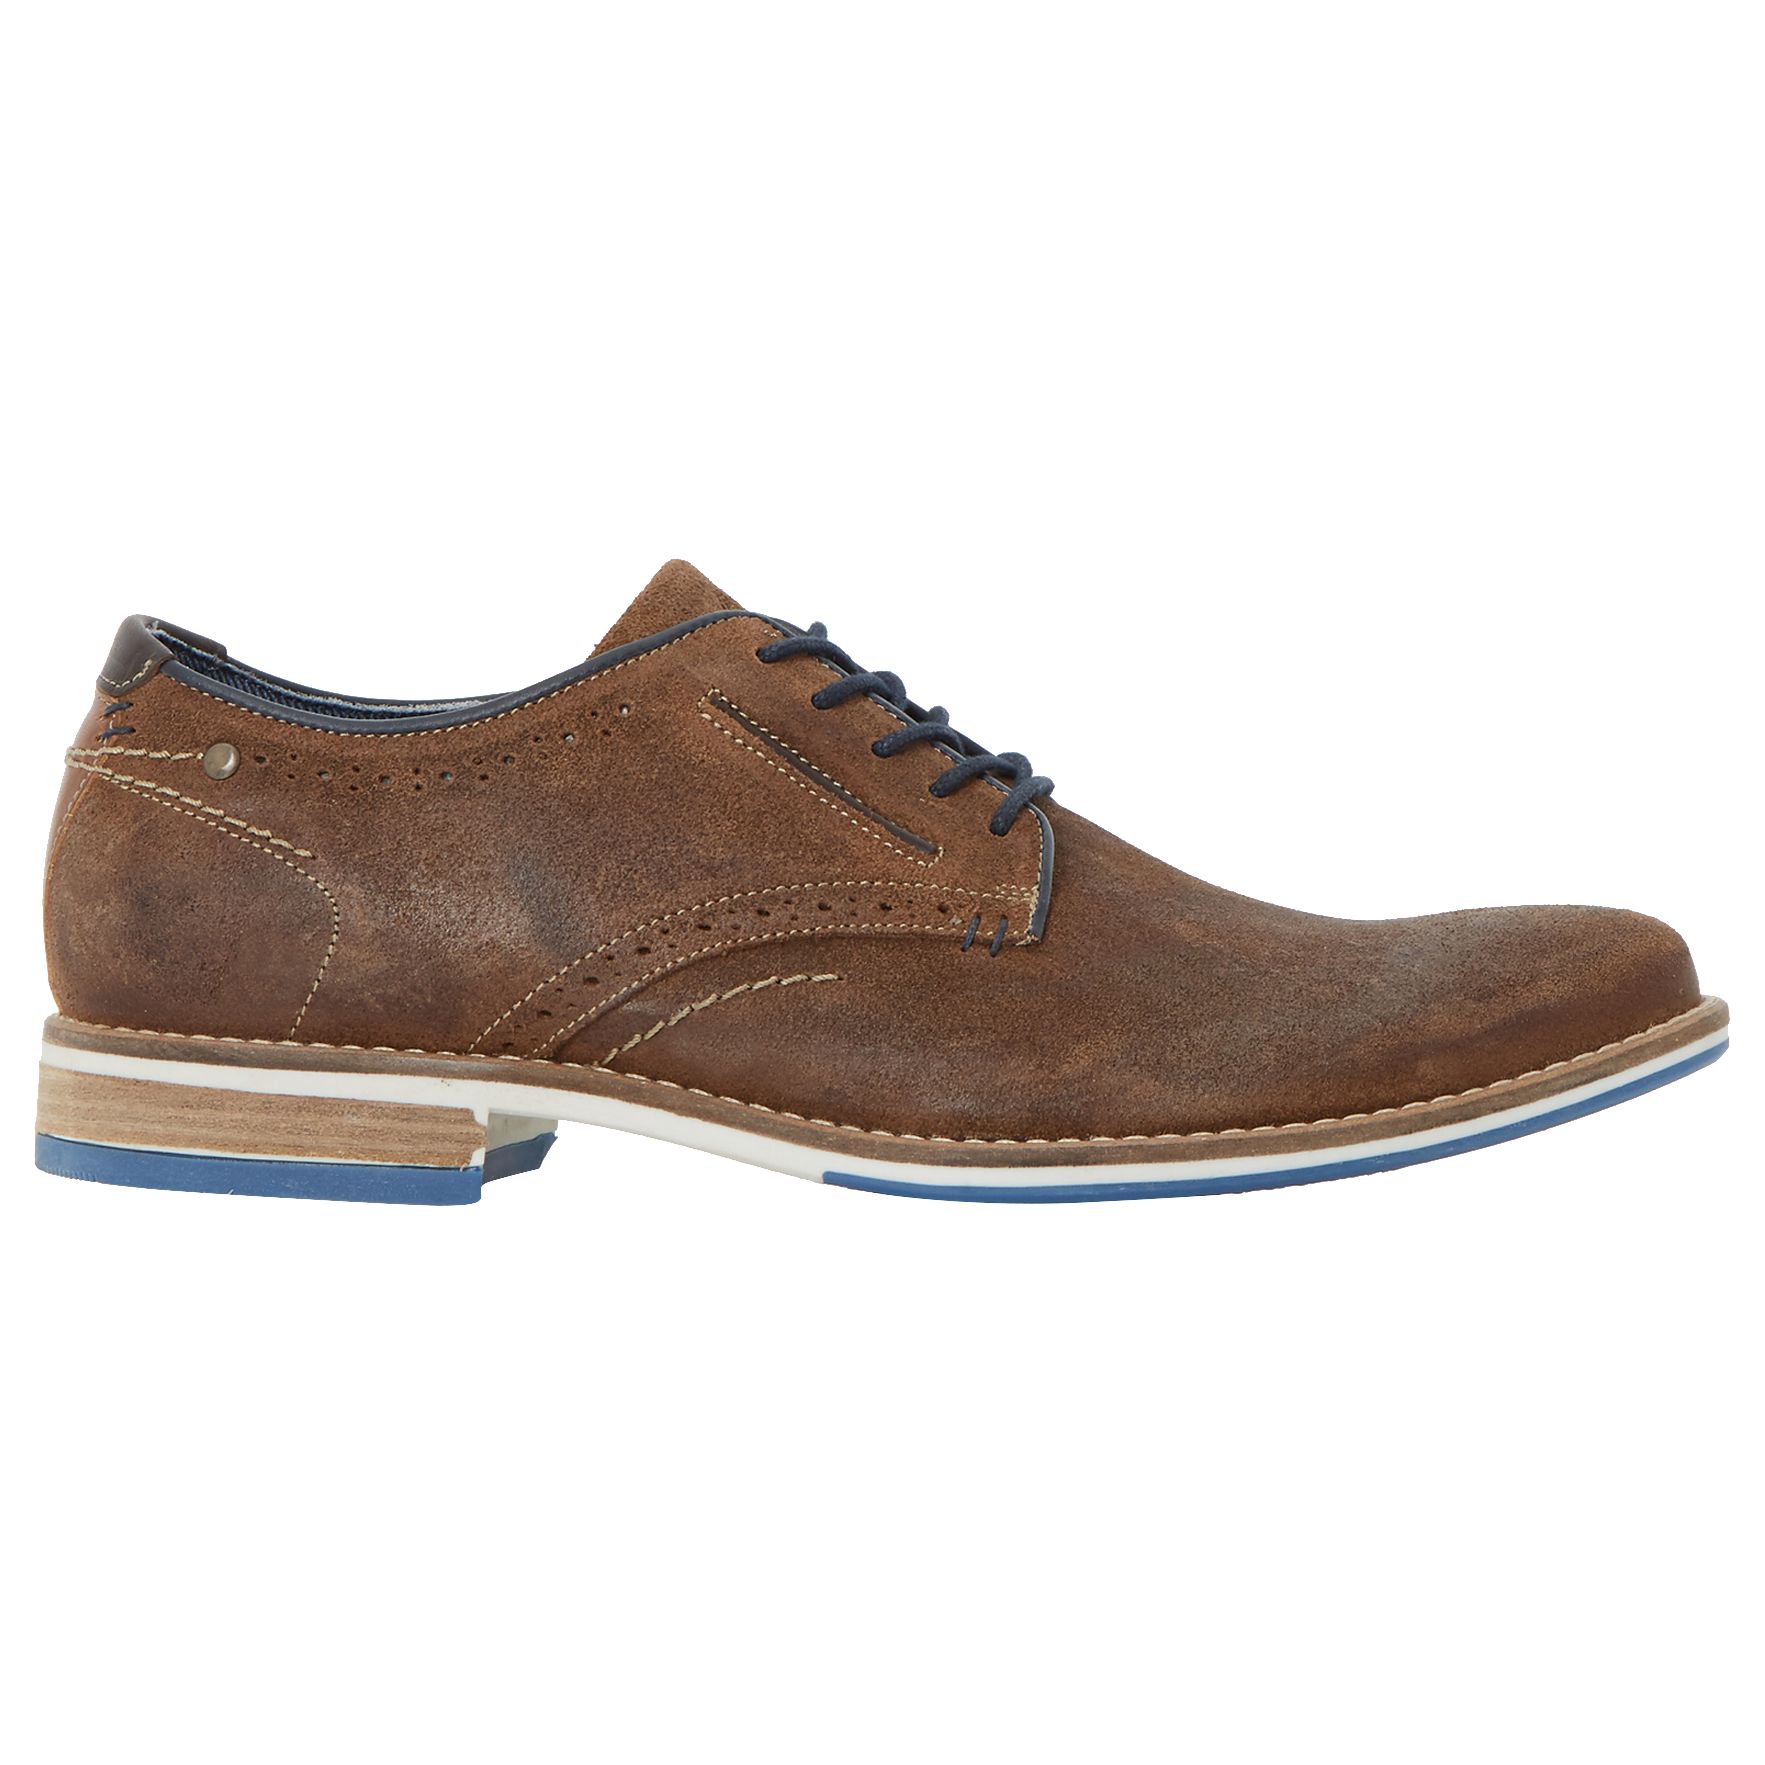 Dune Brewer Gibson Suede Shoes, Tan Suede, 8